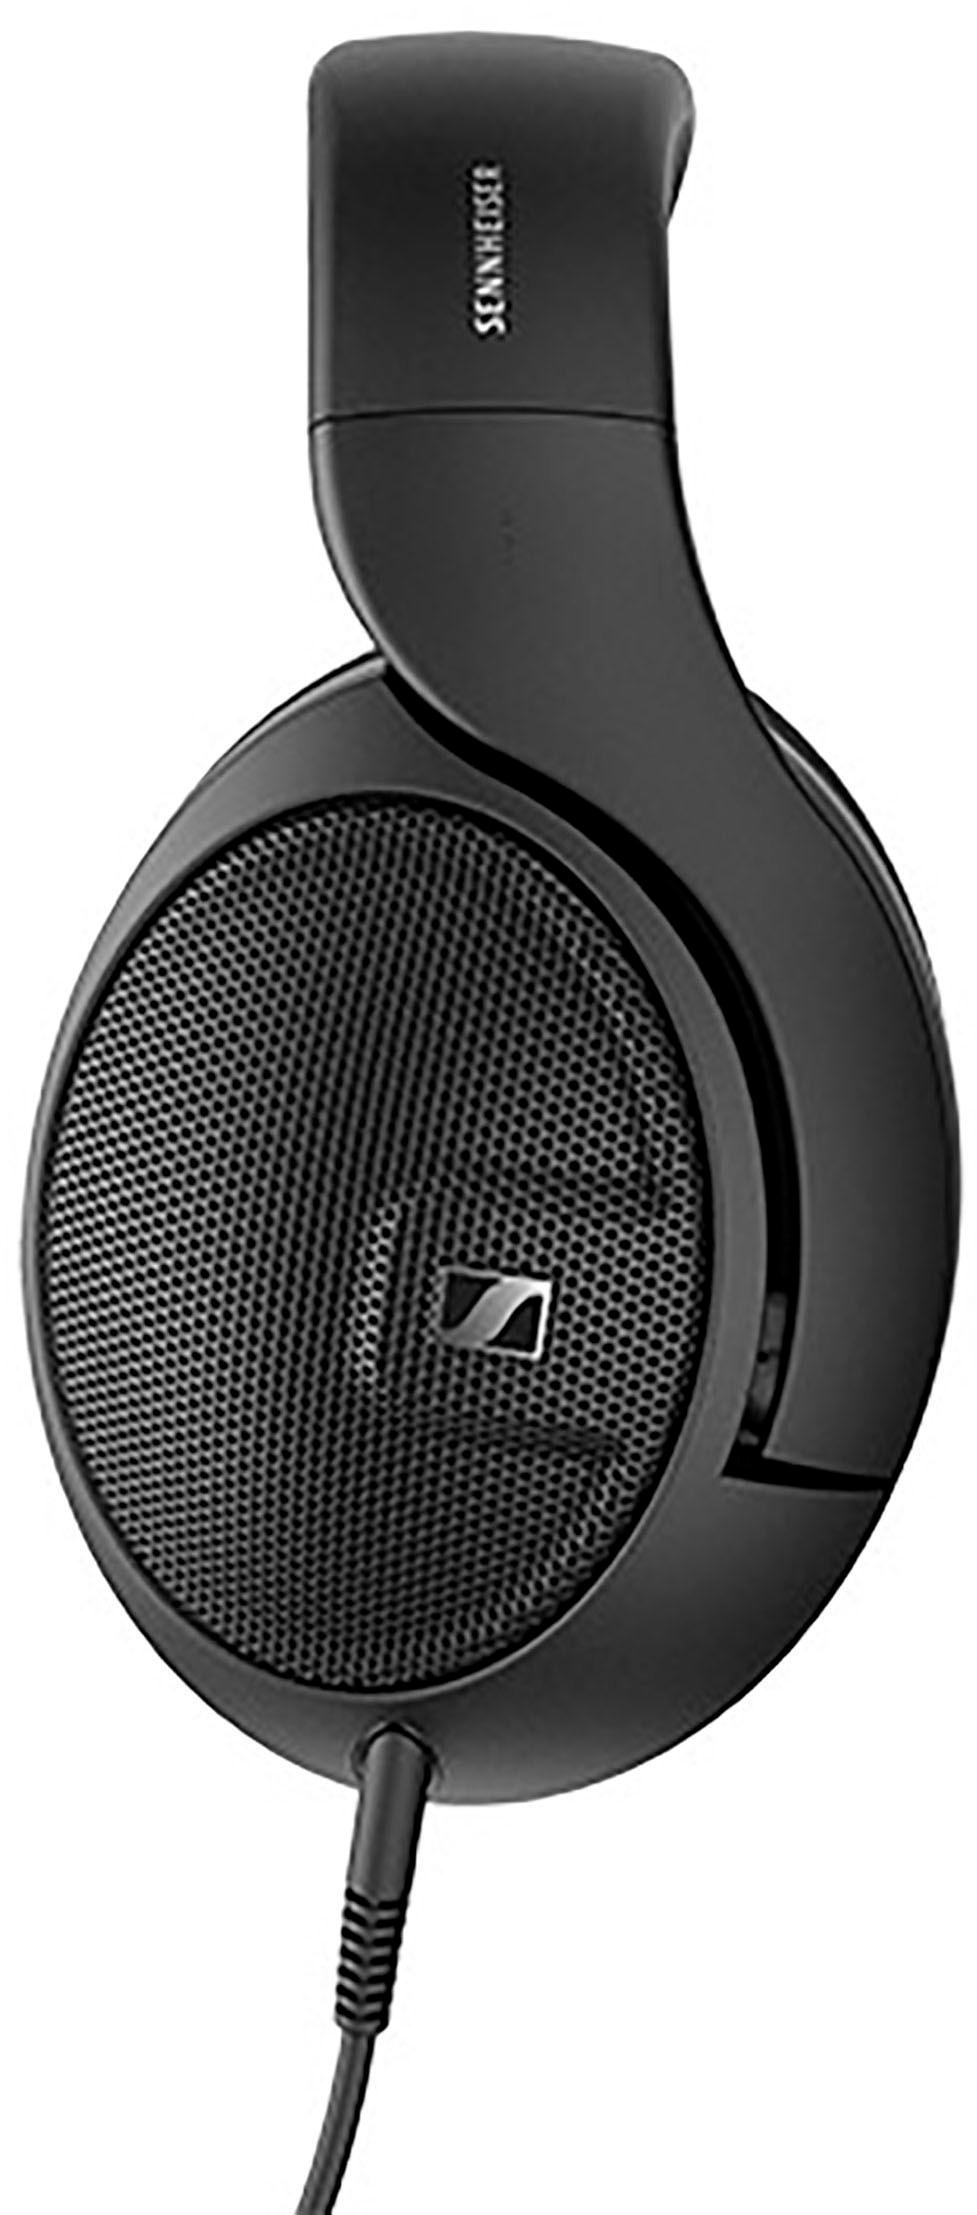 Angle View: Sennheiser - HD 560S Wired Open Aire Over-the-Ear Audiophile Headphones - Black